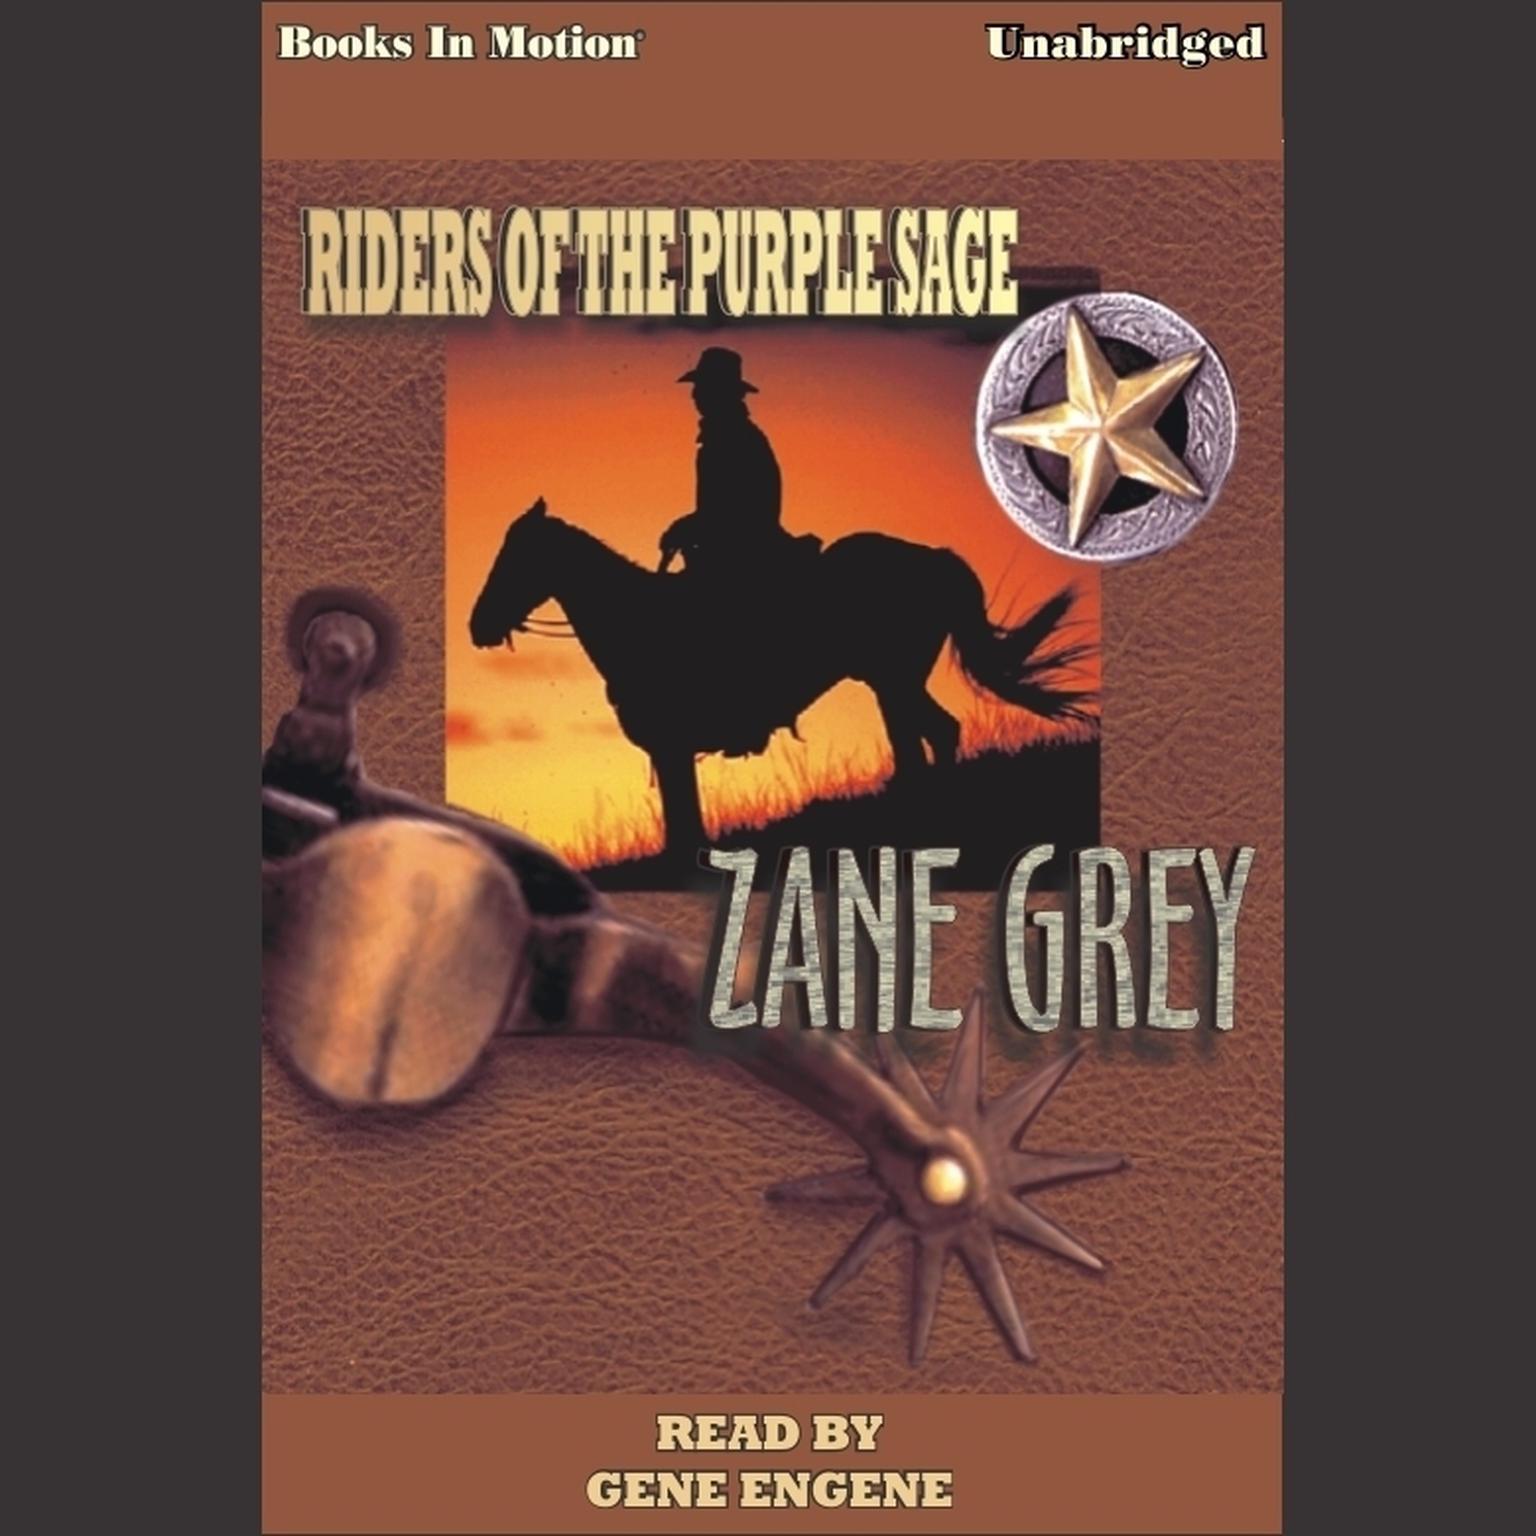 Riders of the Purple Sage Audiobook, by Zane Grey